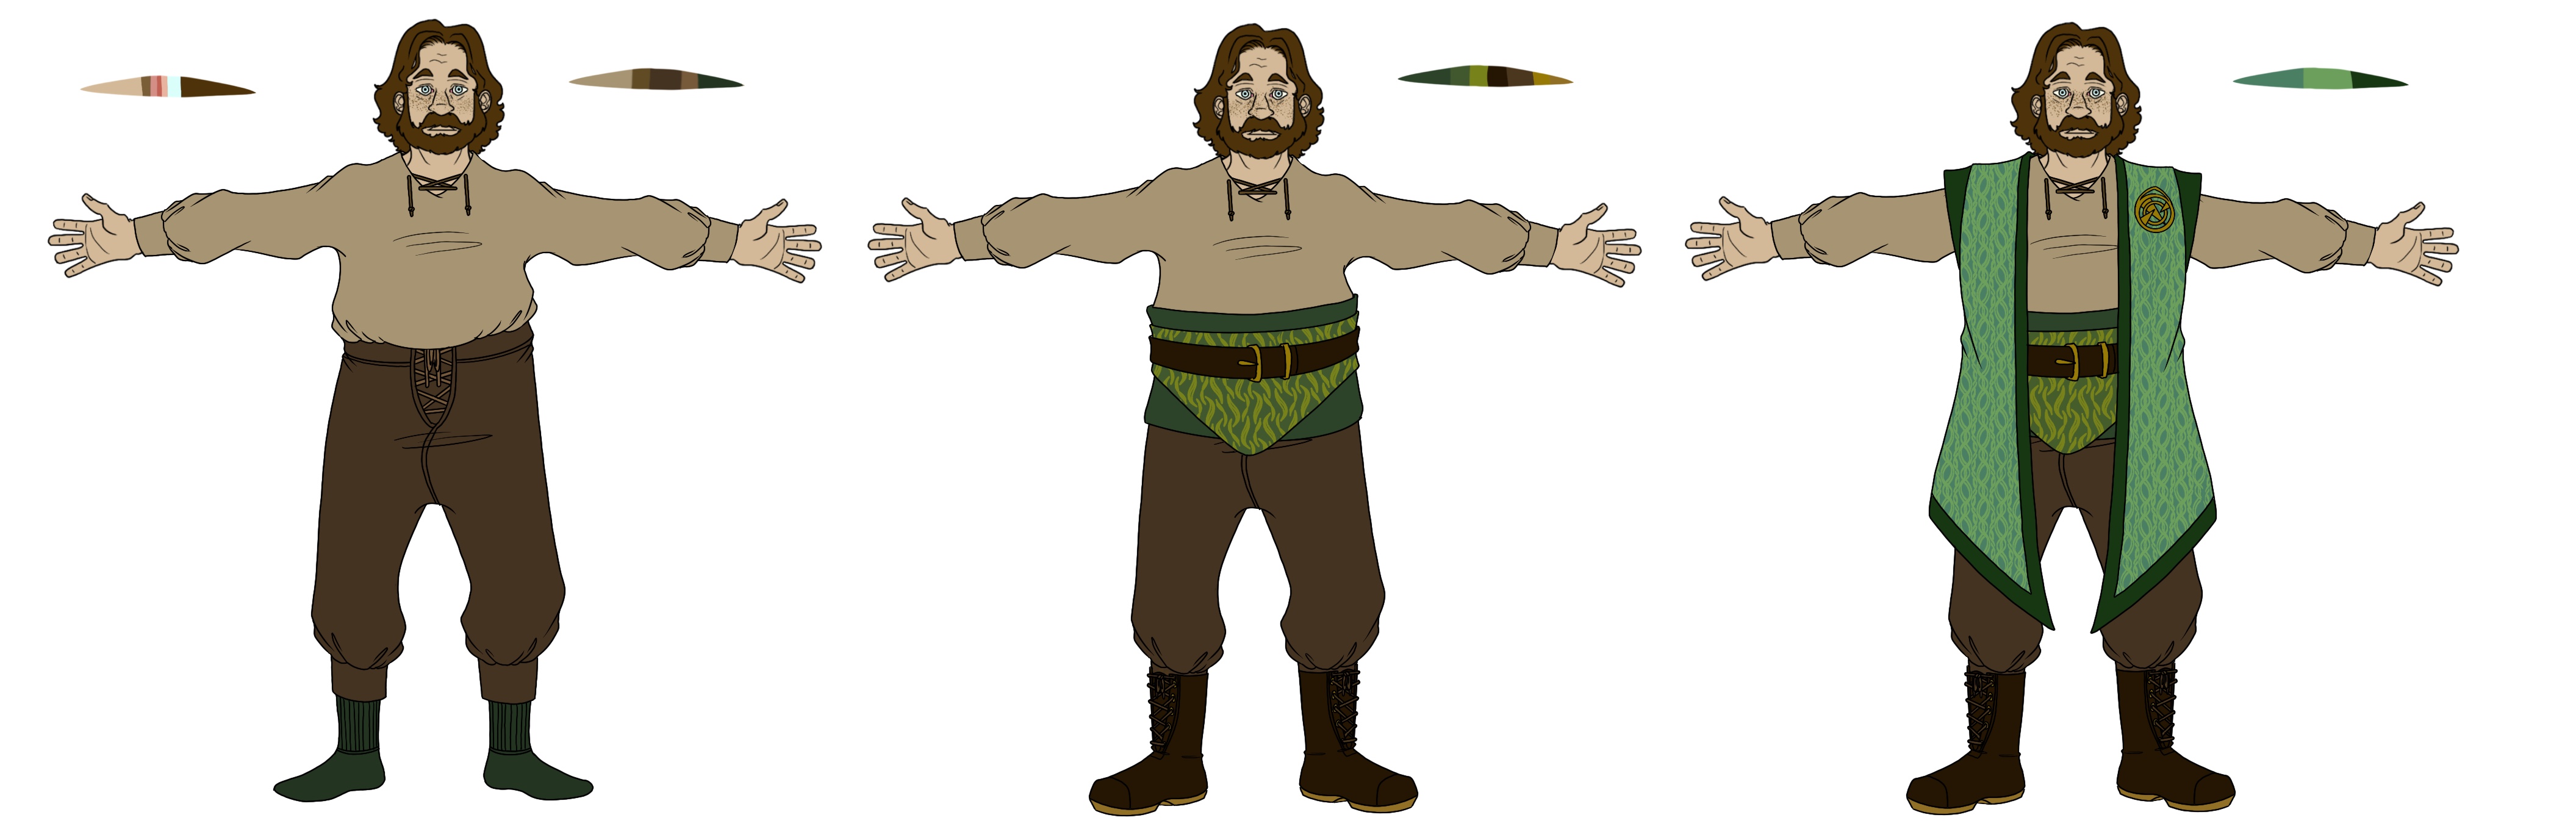 An illustrated reference of a white man showing the layers of a medieval style outfit.